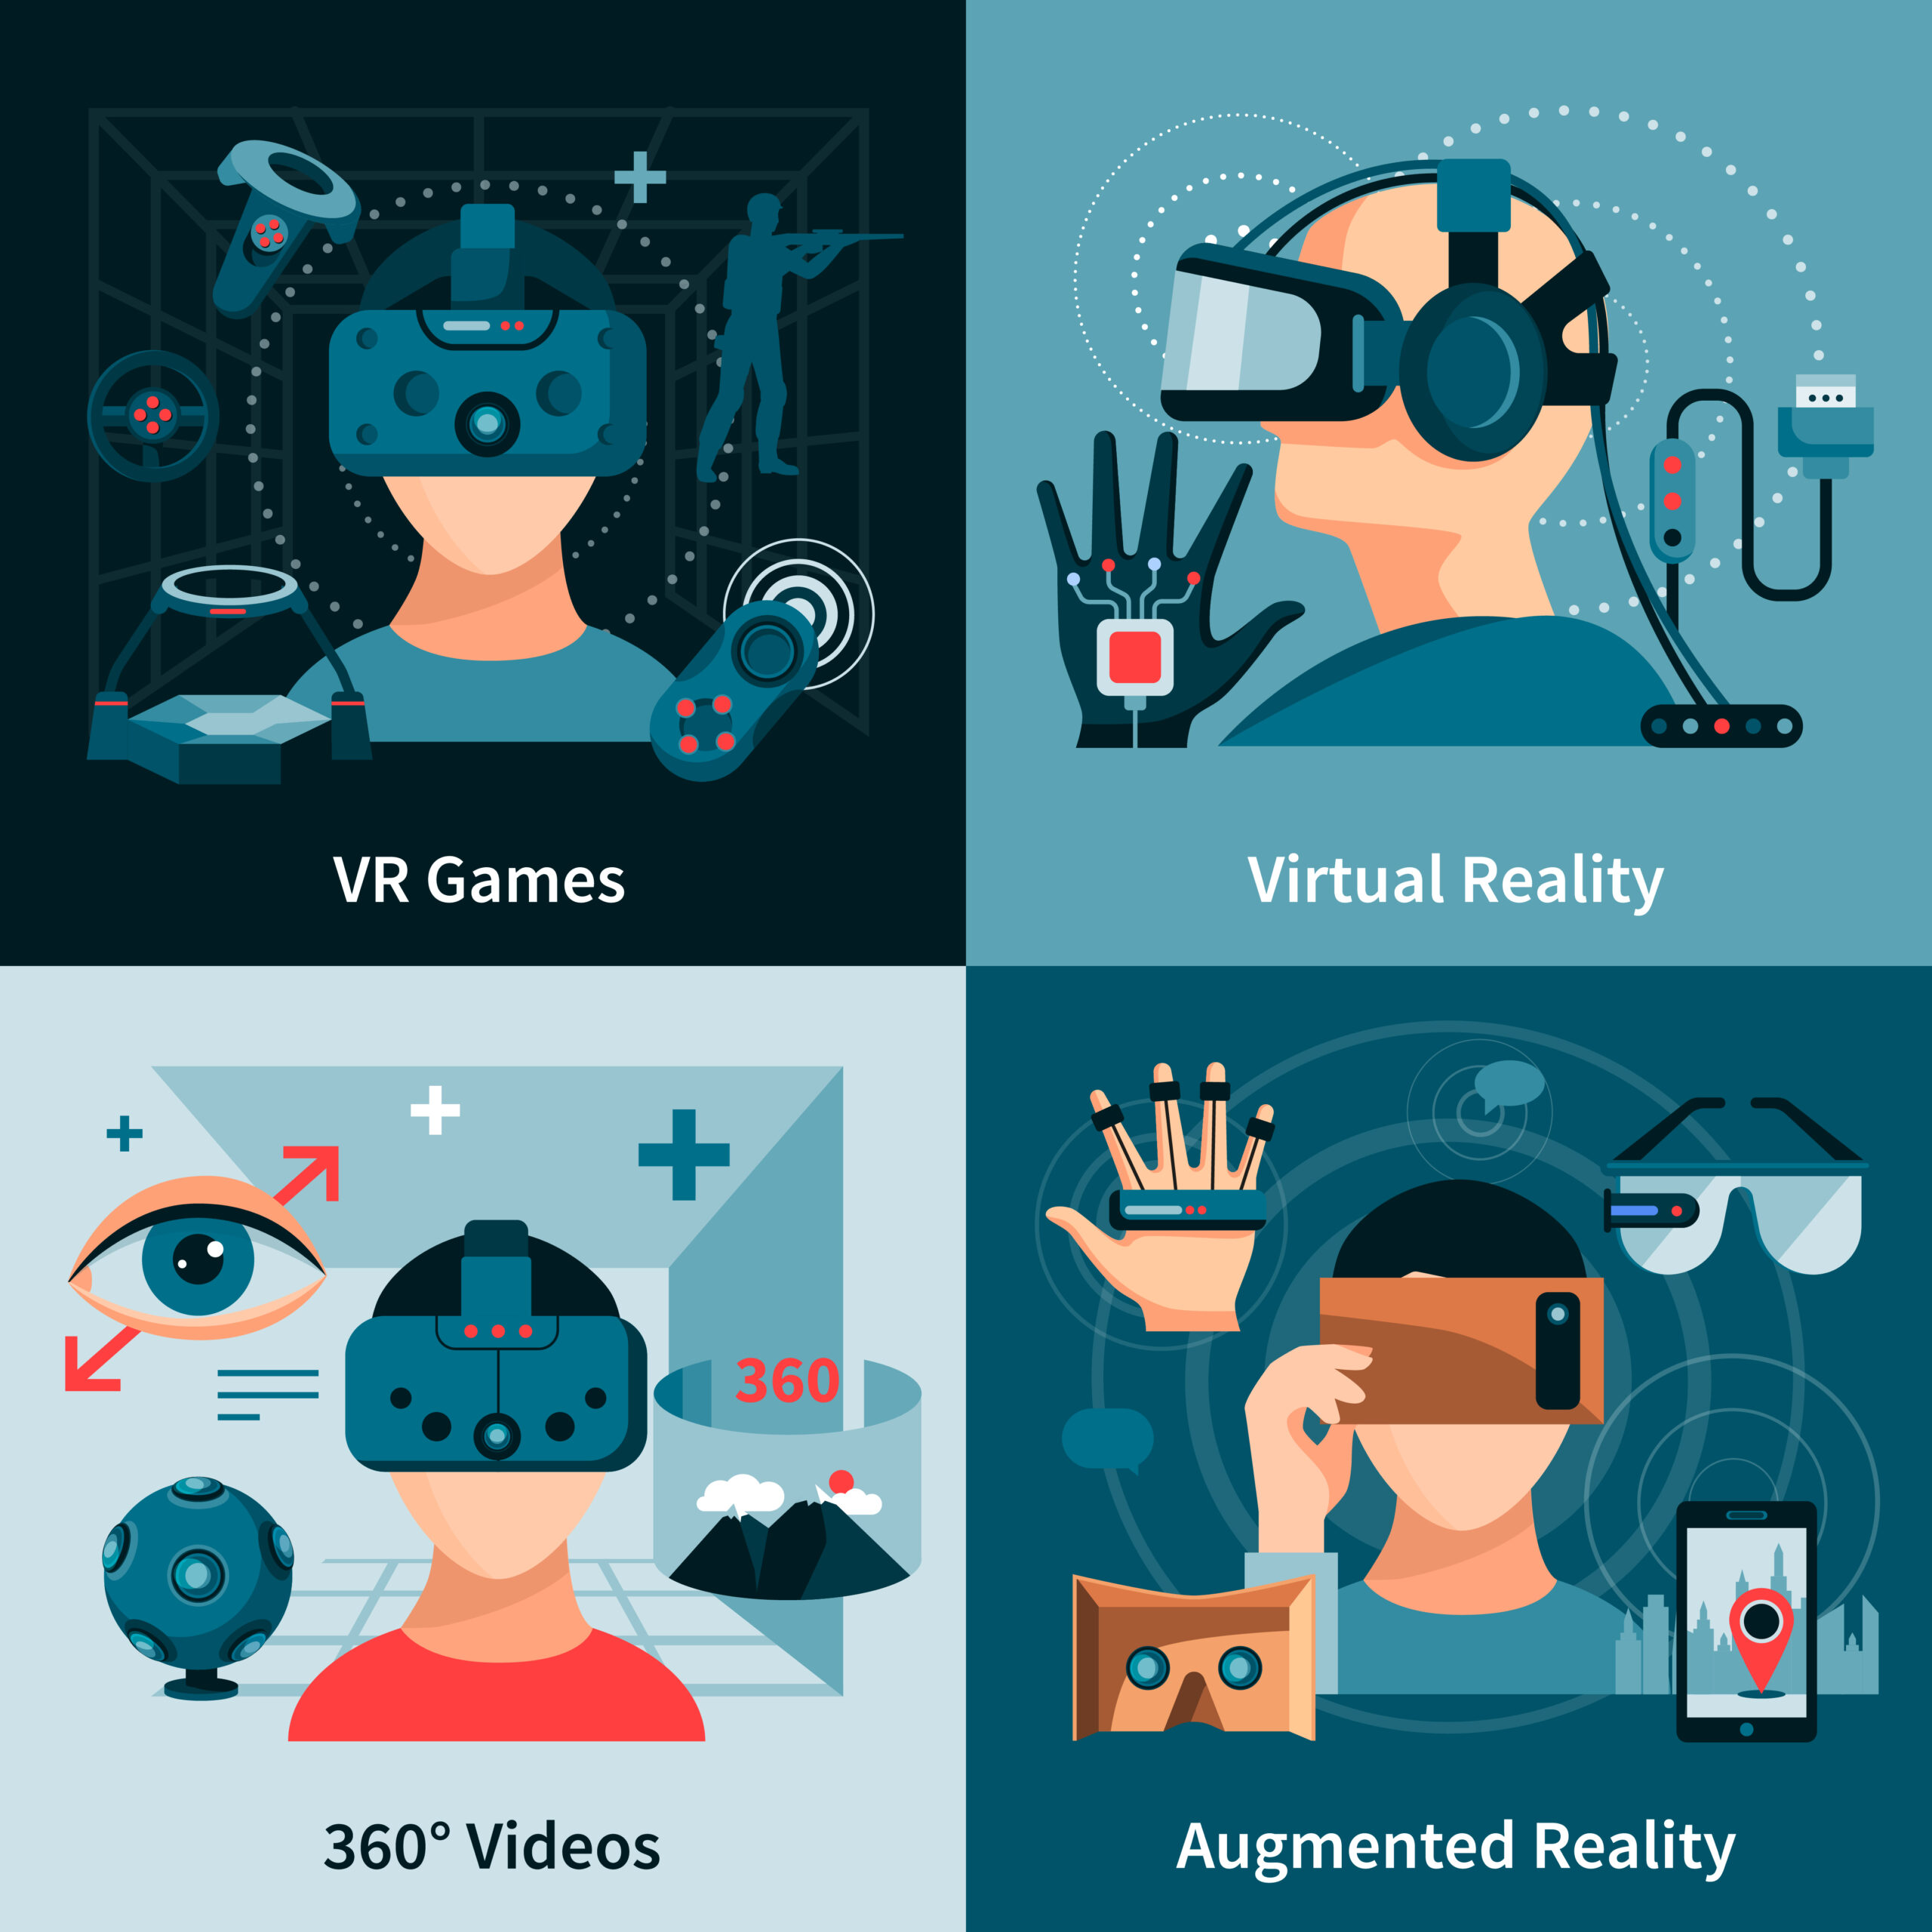 Collage of Future Learning Technologies: VR headsets, AI algorithms, Microlearning, and Gamification icons symbolizing the evolution of eLearning